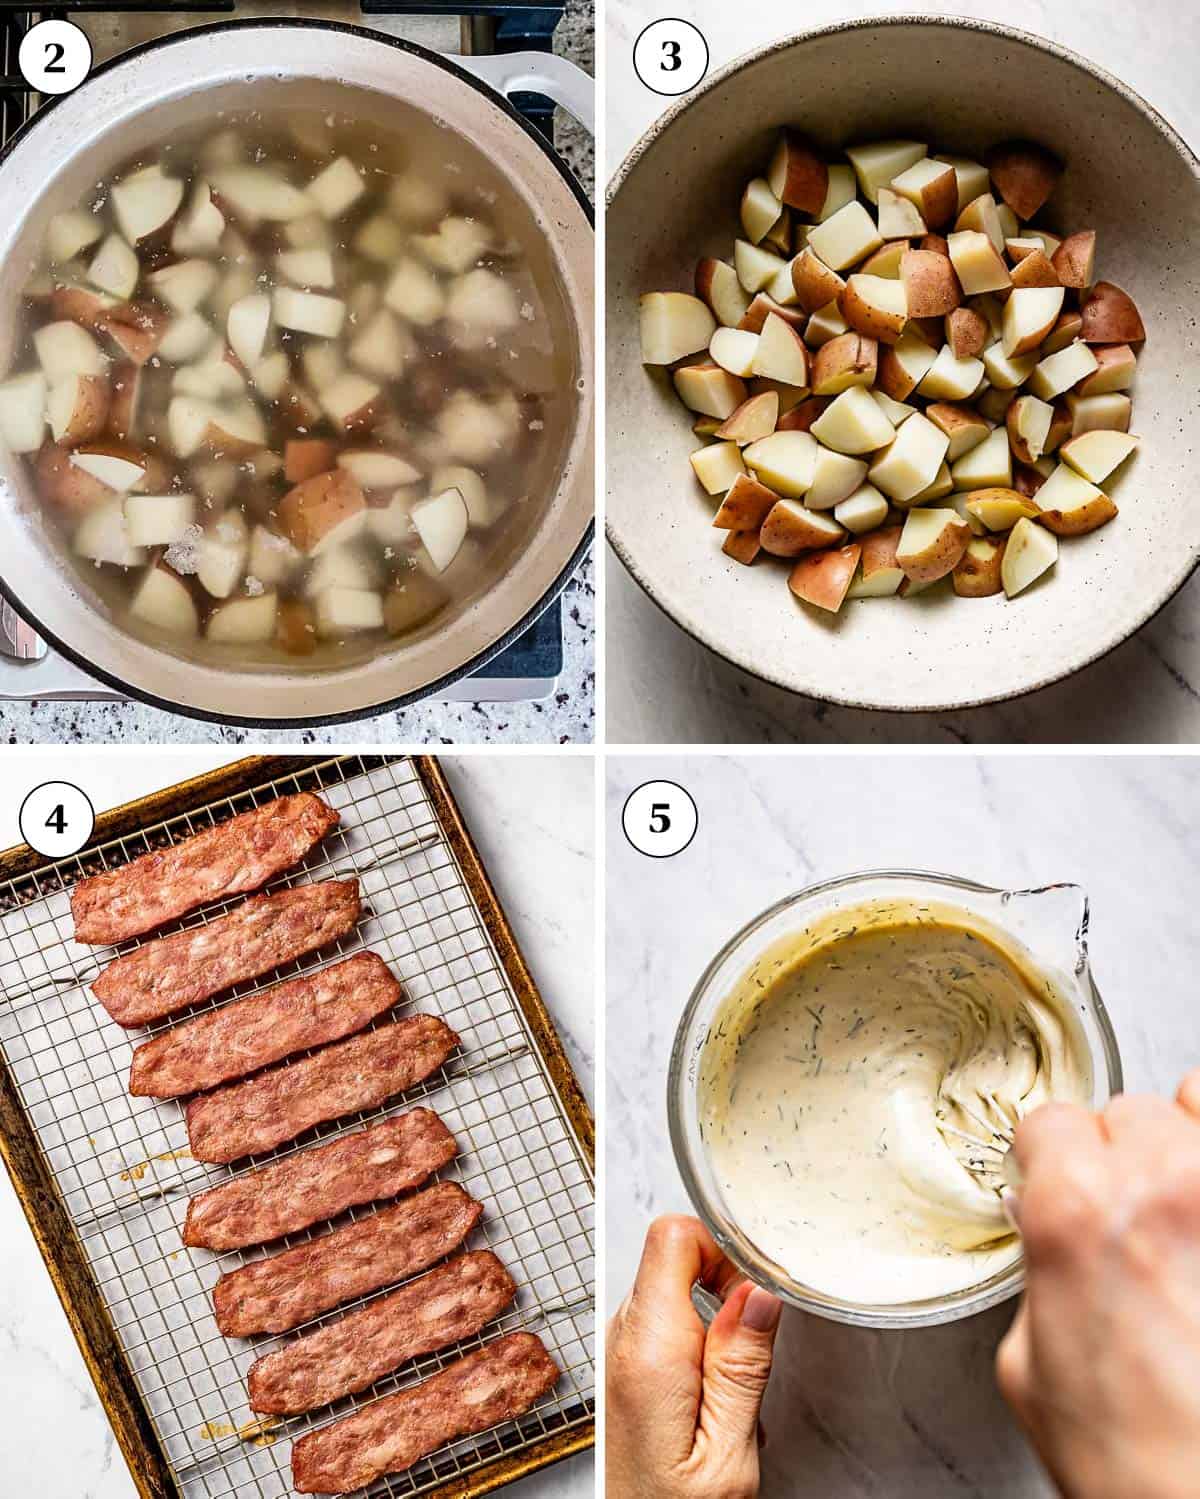 Person showing how to make potato salad with red potatoes in a collage of images.